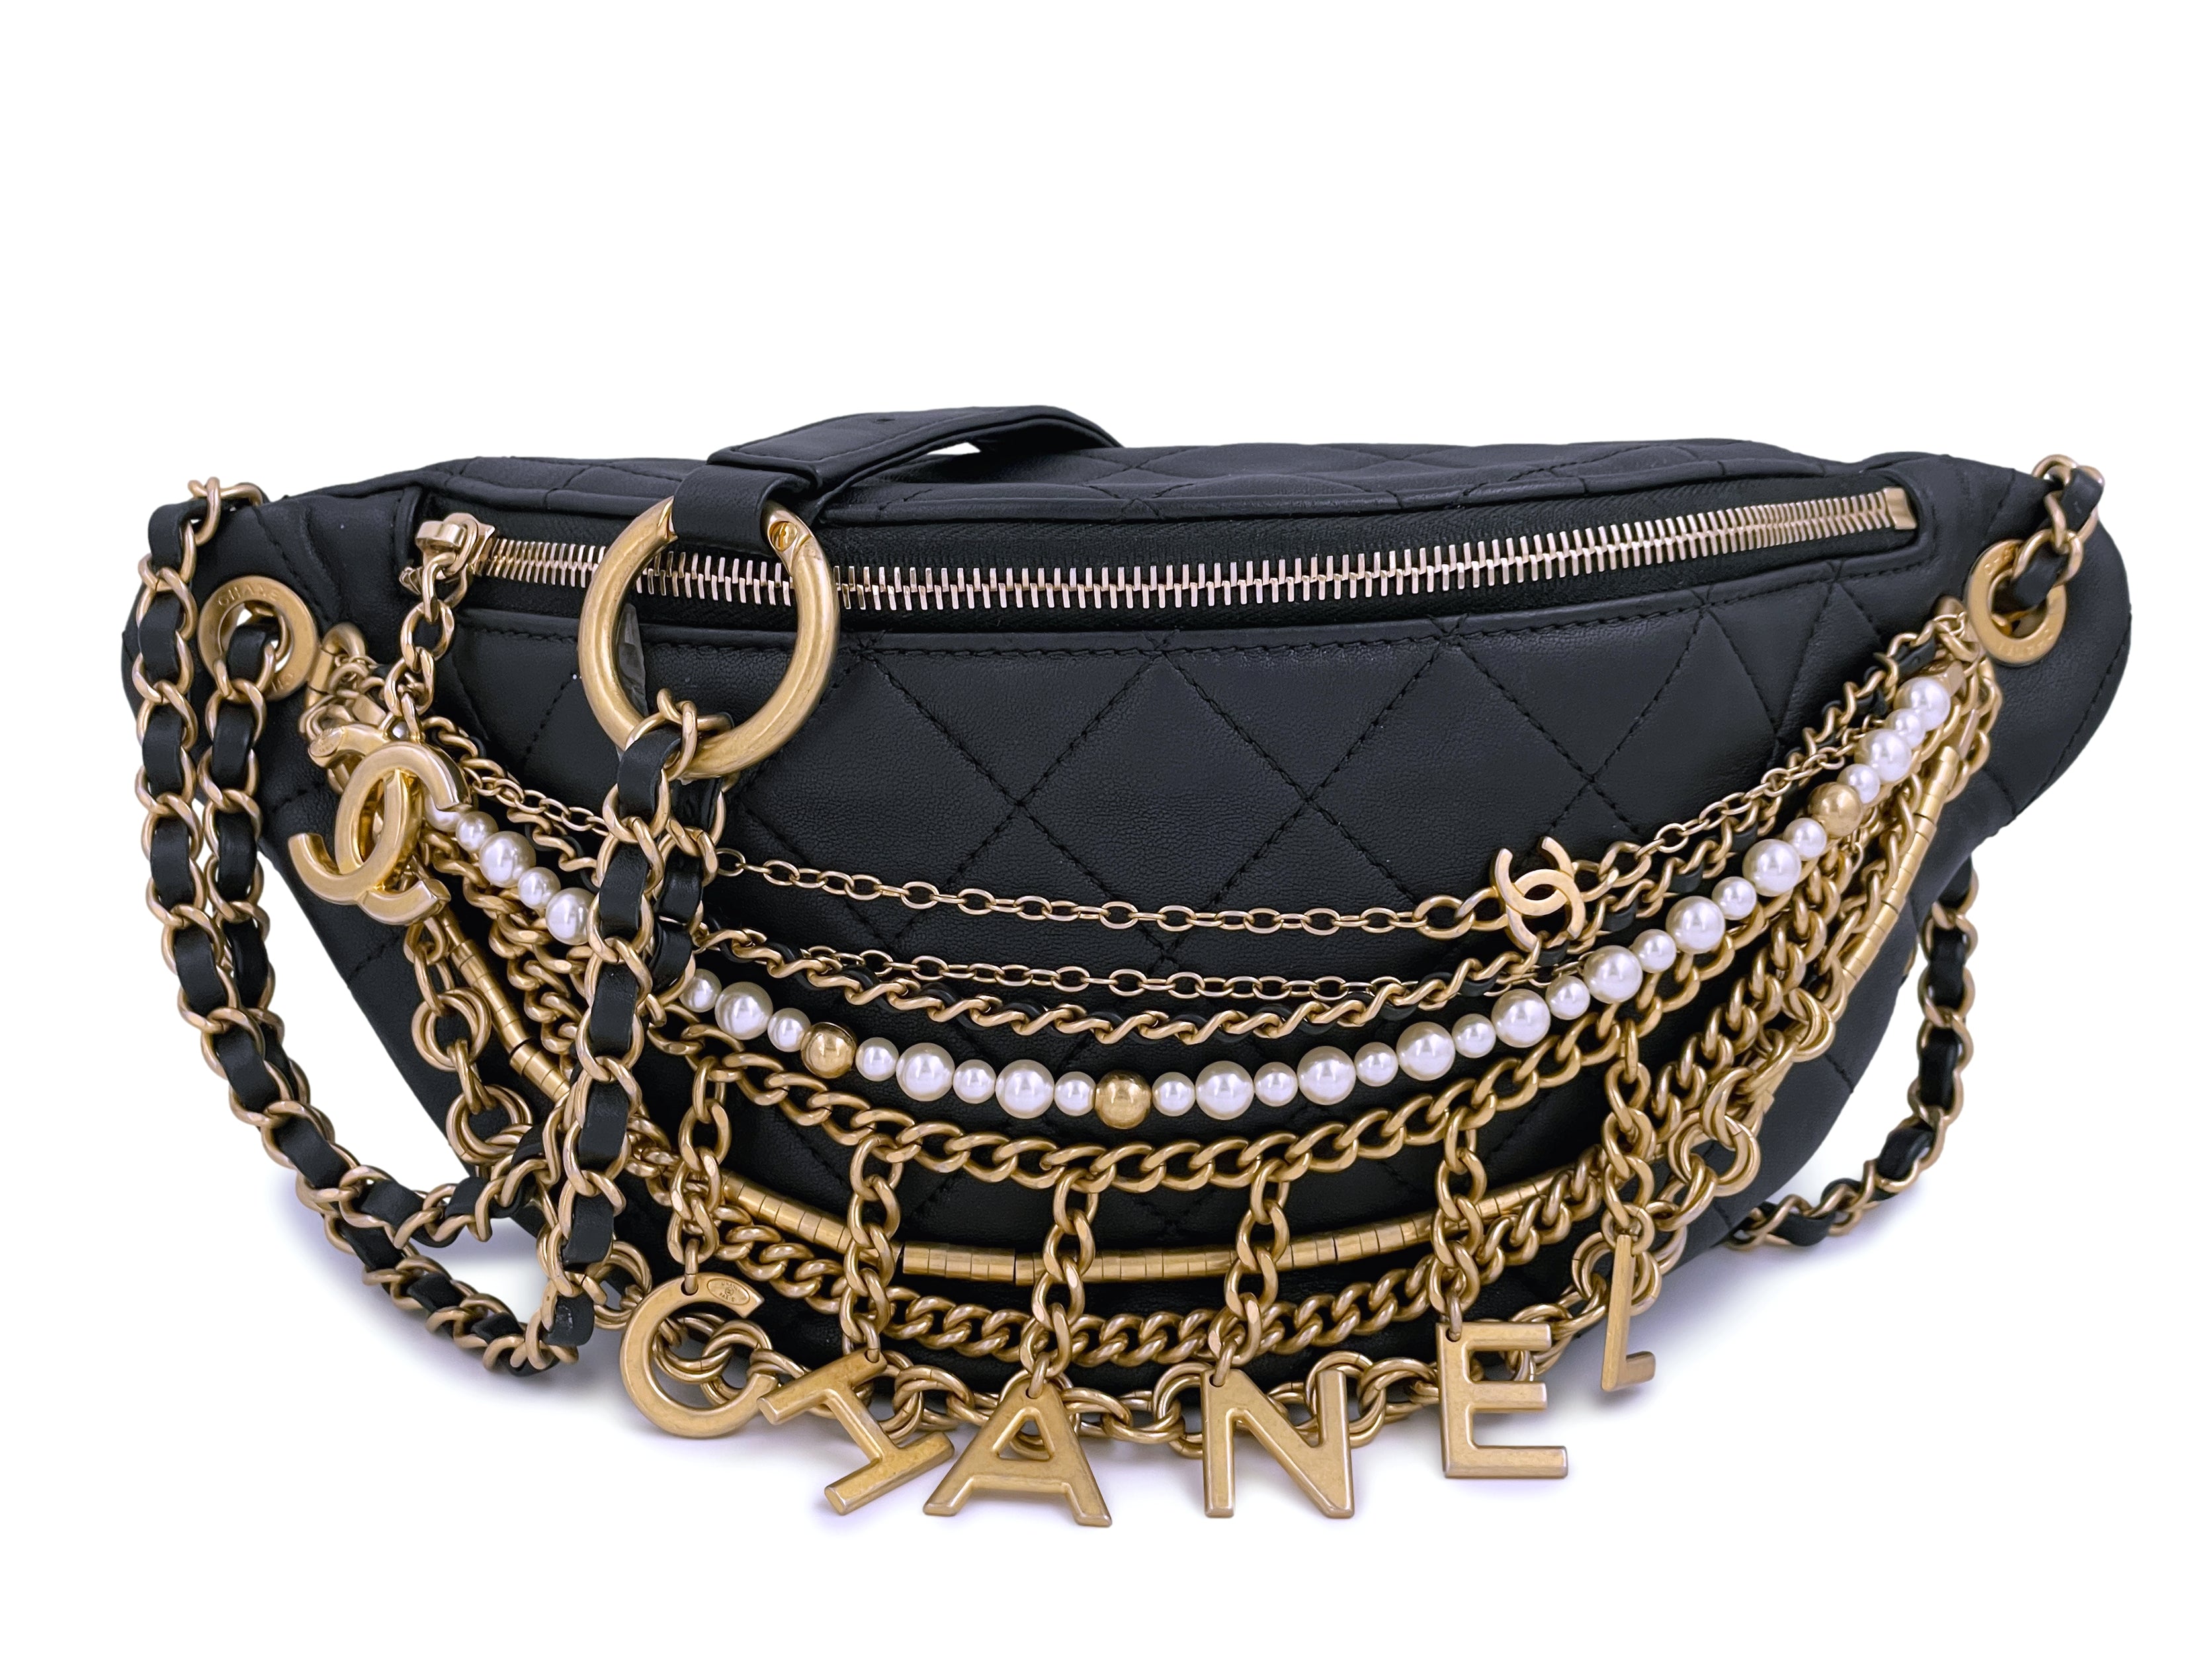 Limited 19A Chanel All About Chains Black XL Waist Bag Fanny Pack